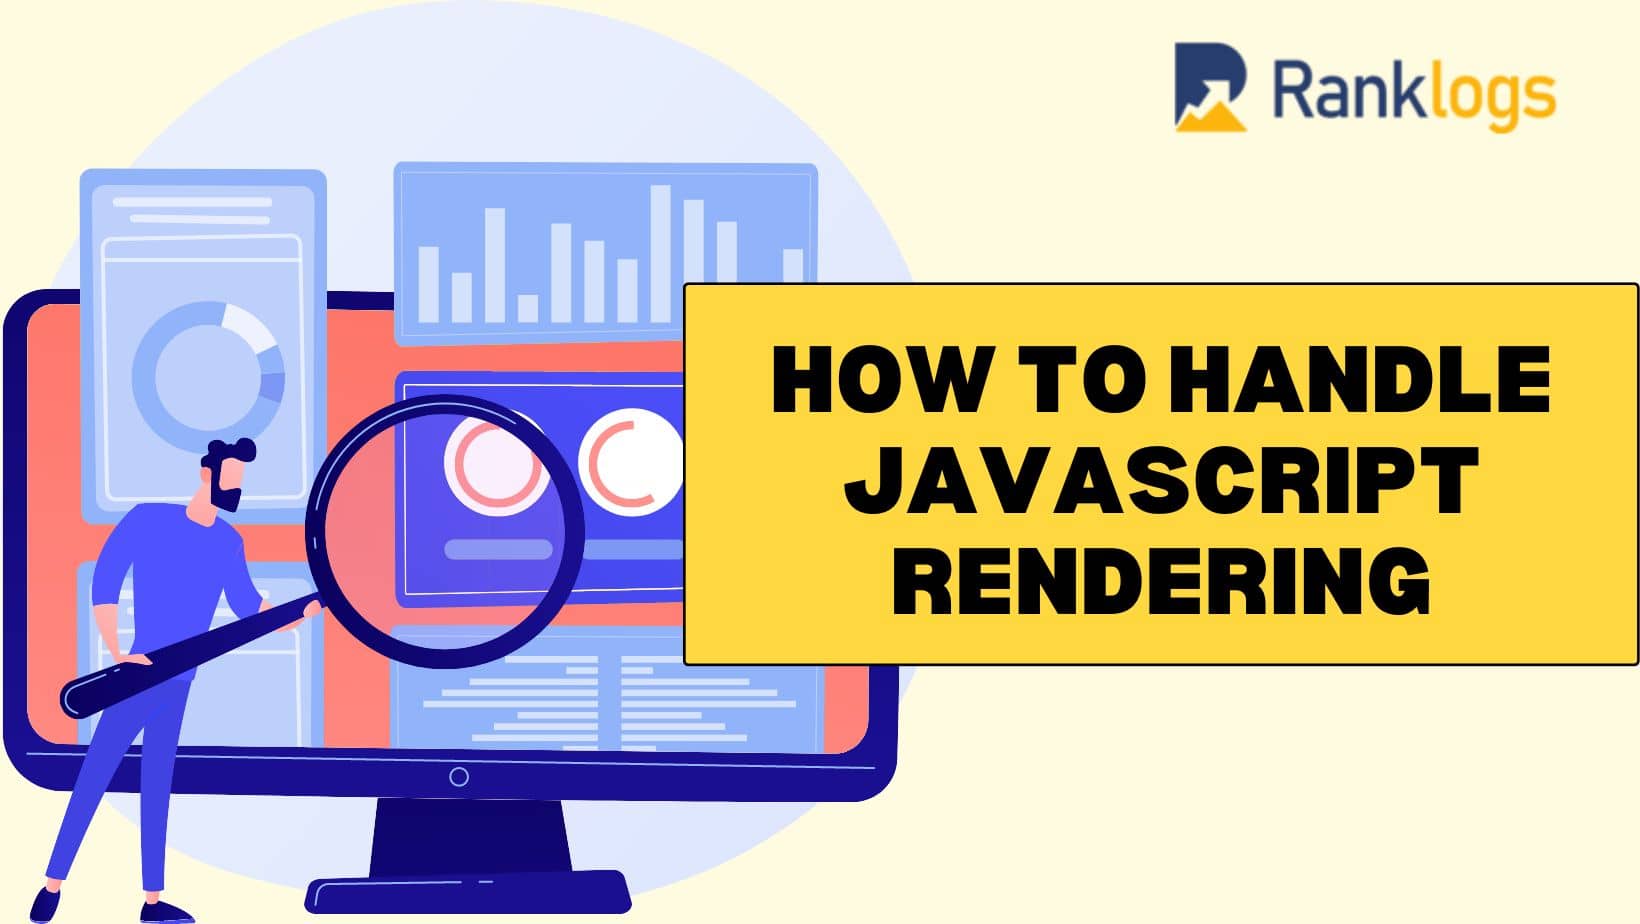 How to Handle JavaScript Rendering for SEO